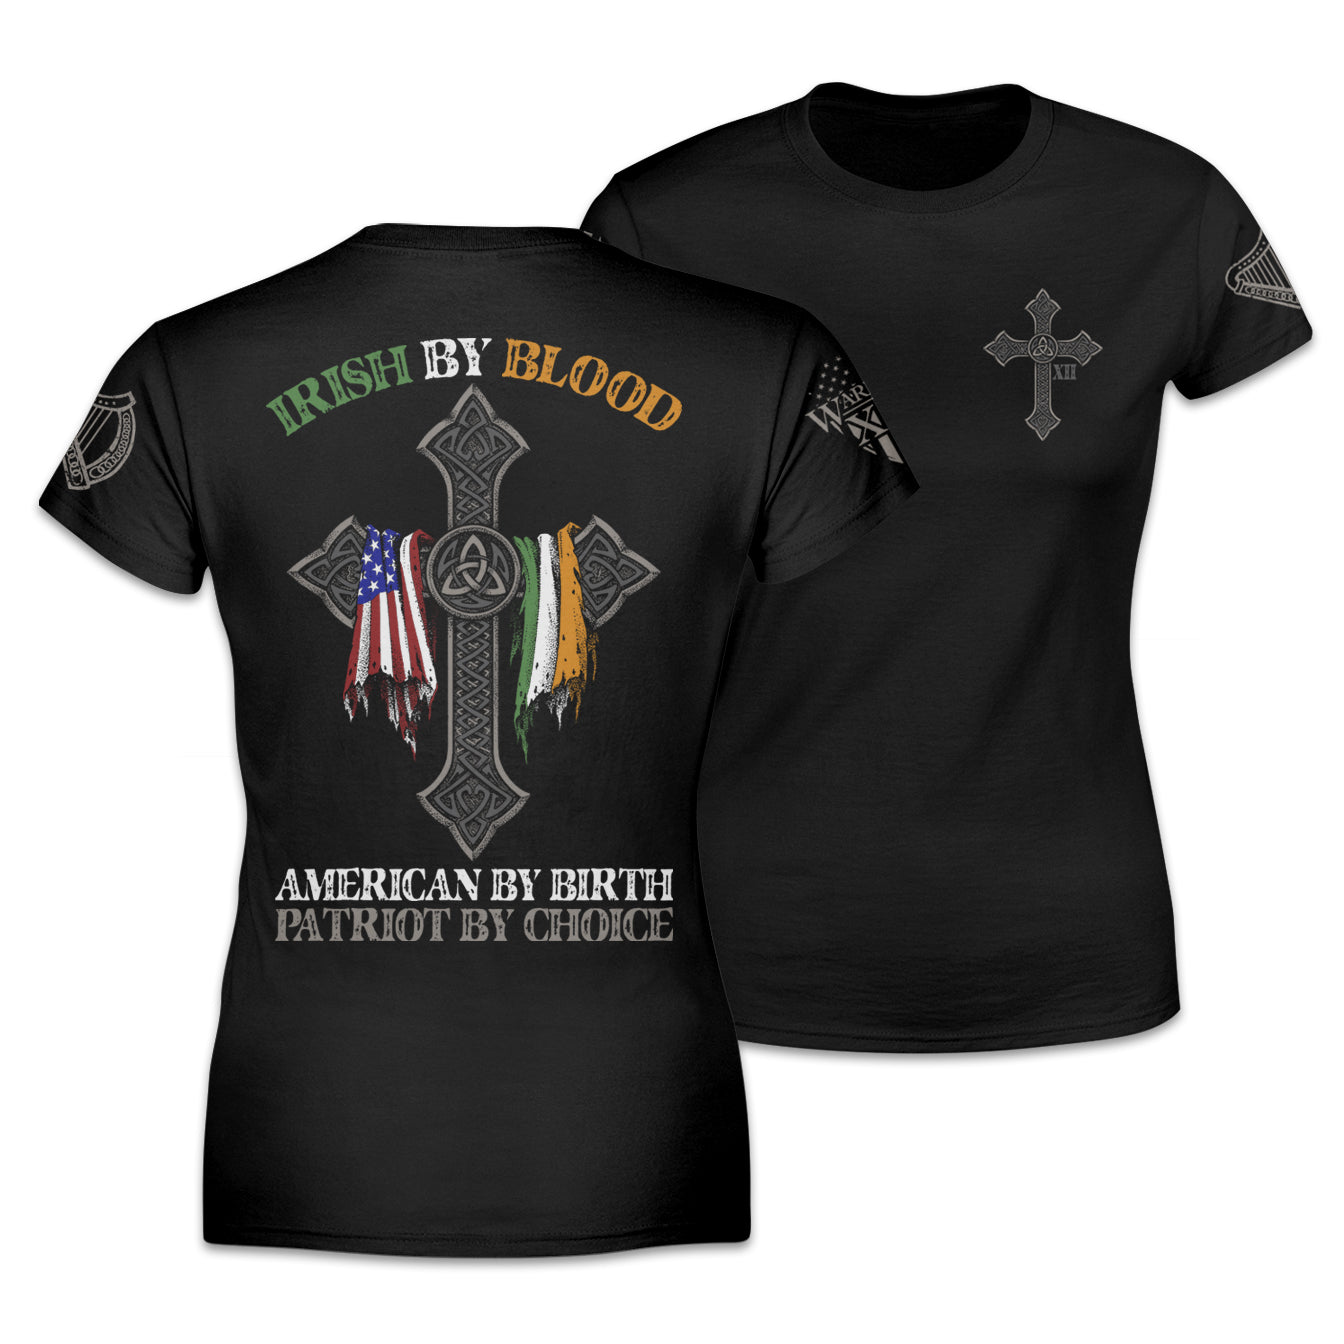 Front & back black women's relaxed fit shirt with the words "Irish by blood, American by birth, patriot by choice" with a cross holding an American and Irish flag printed on the shirt.